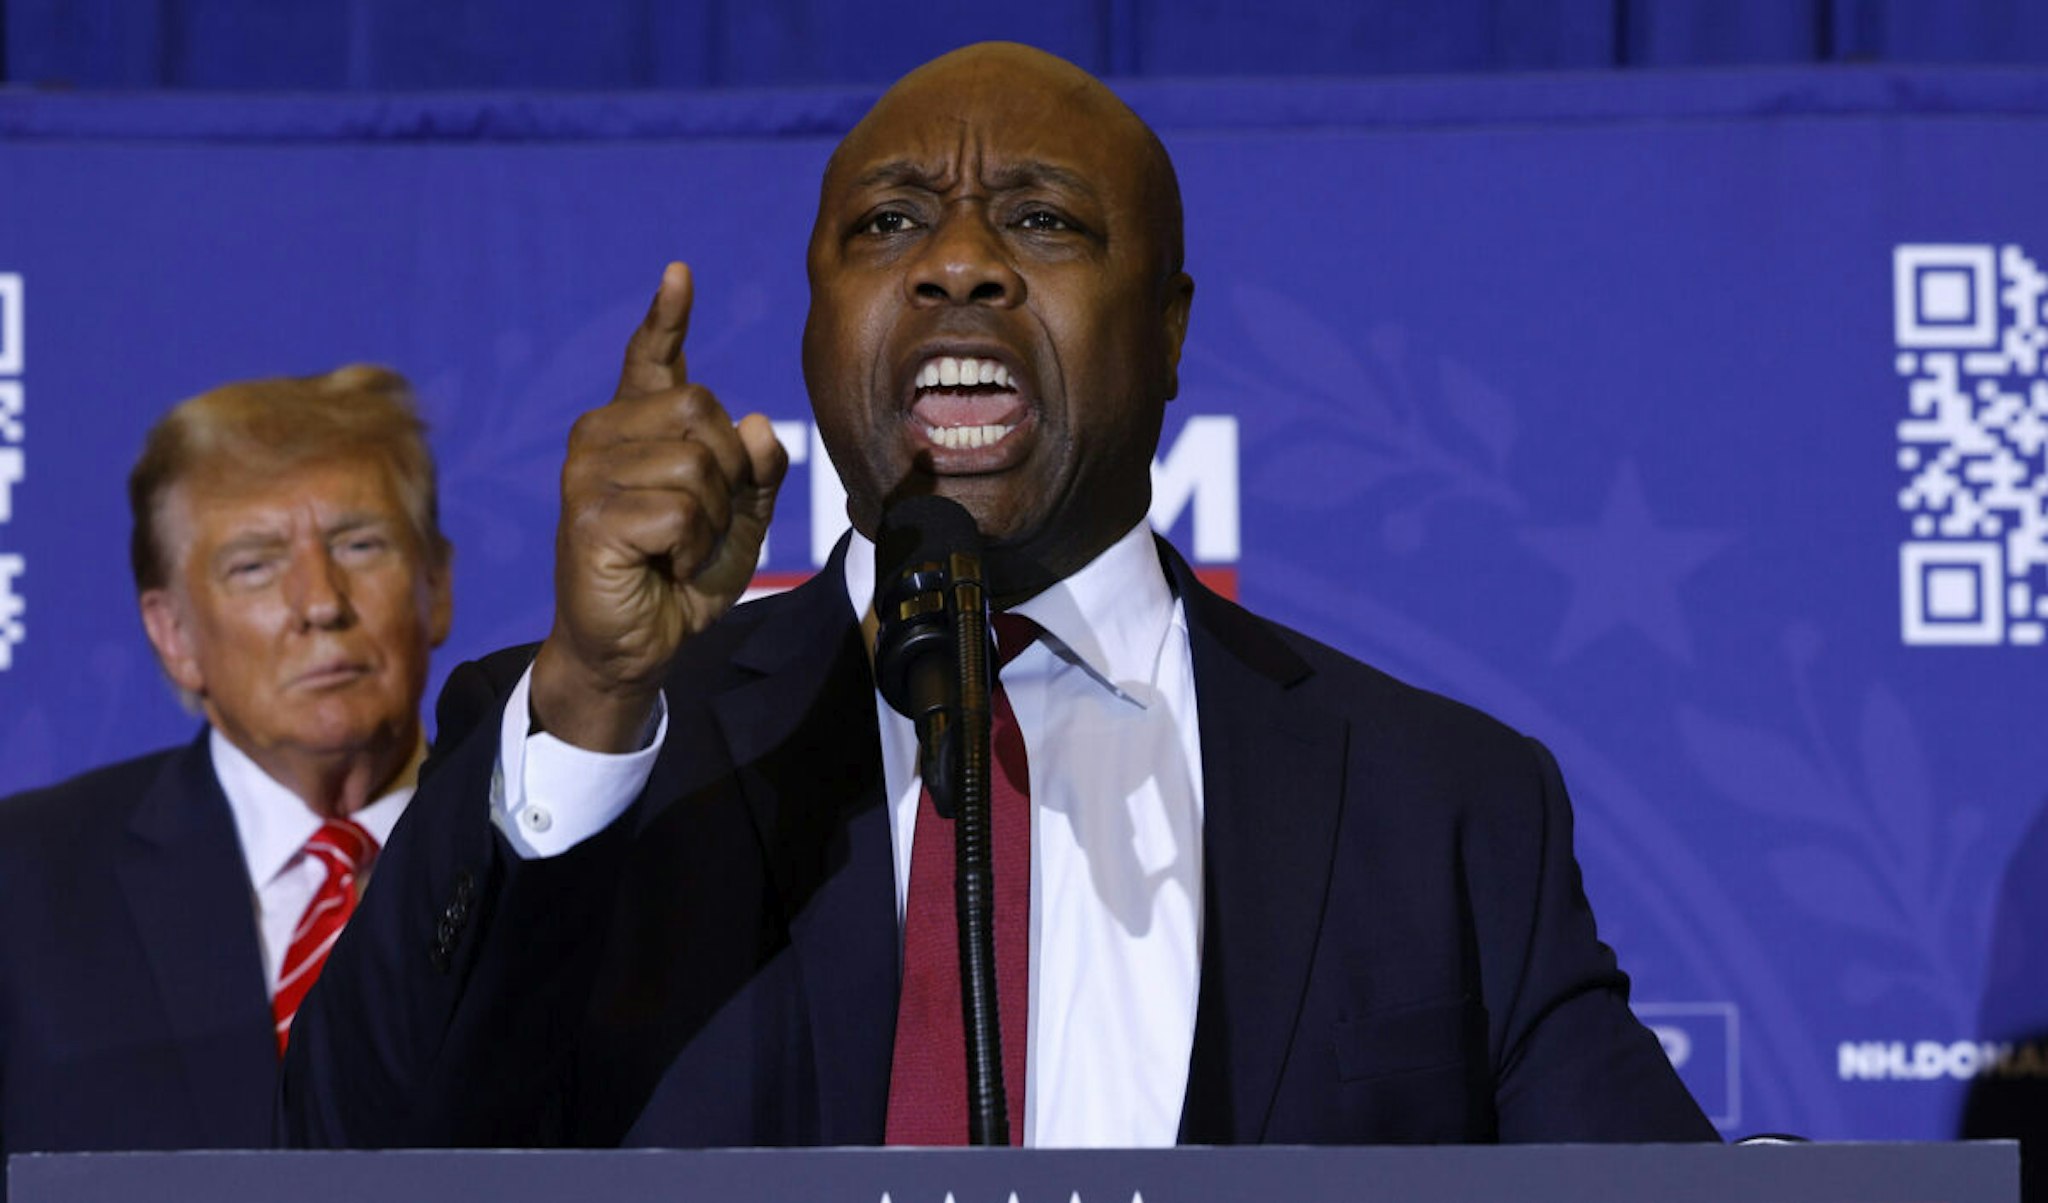 Sen. Tim Scott (R-SC) speaks as Republican presidential candidate and former President Donald Trump looks on during a campaign rally at the Grappone Convention Center on January 19, 2024 in Concord, New Hampshire.